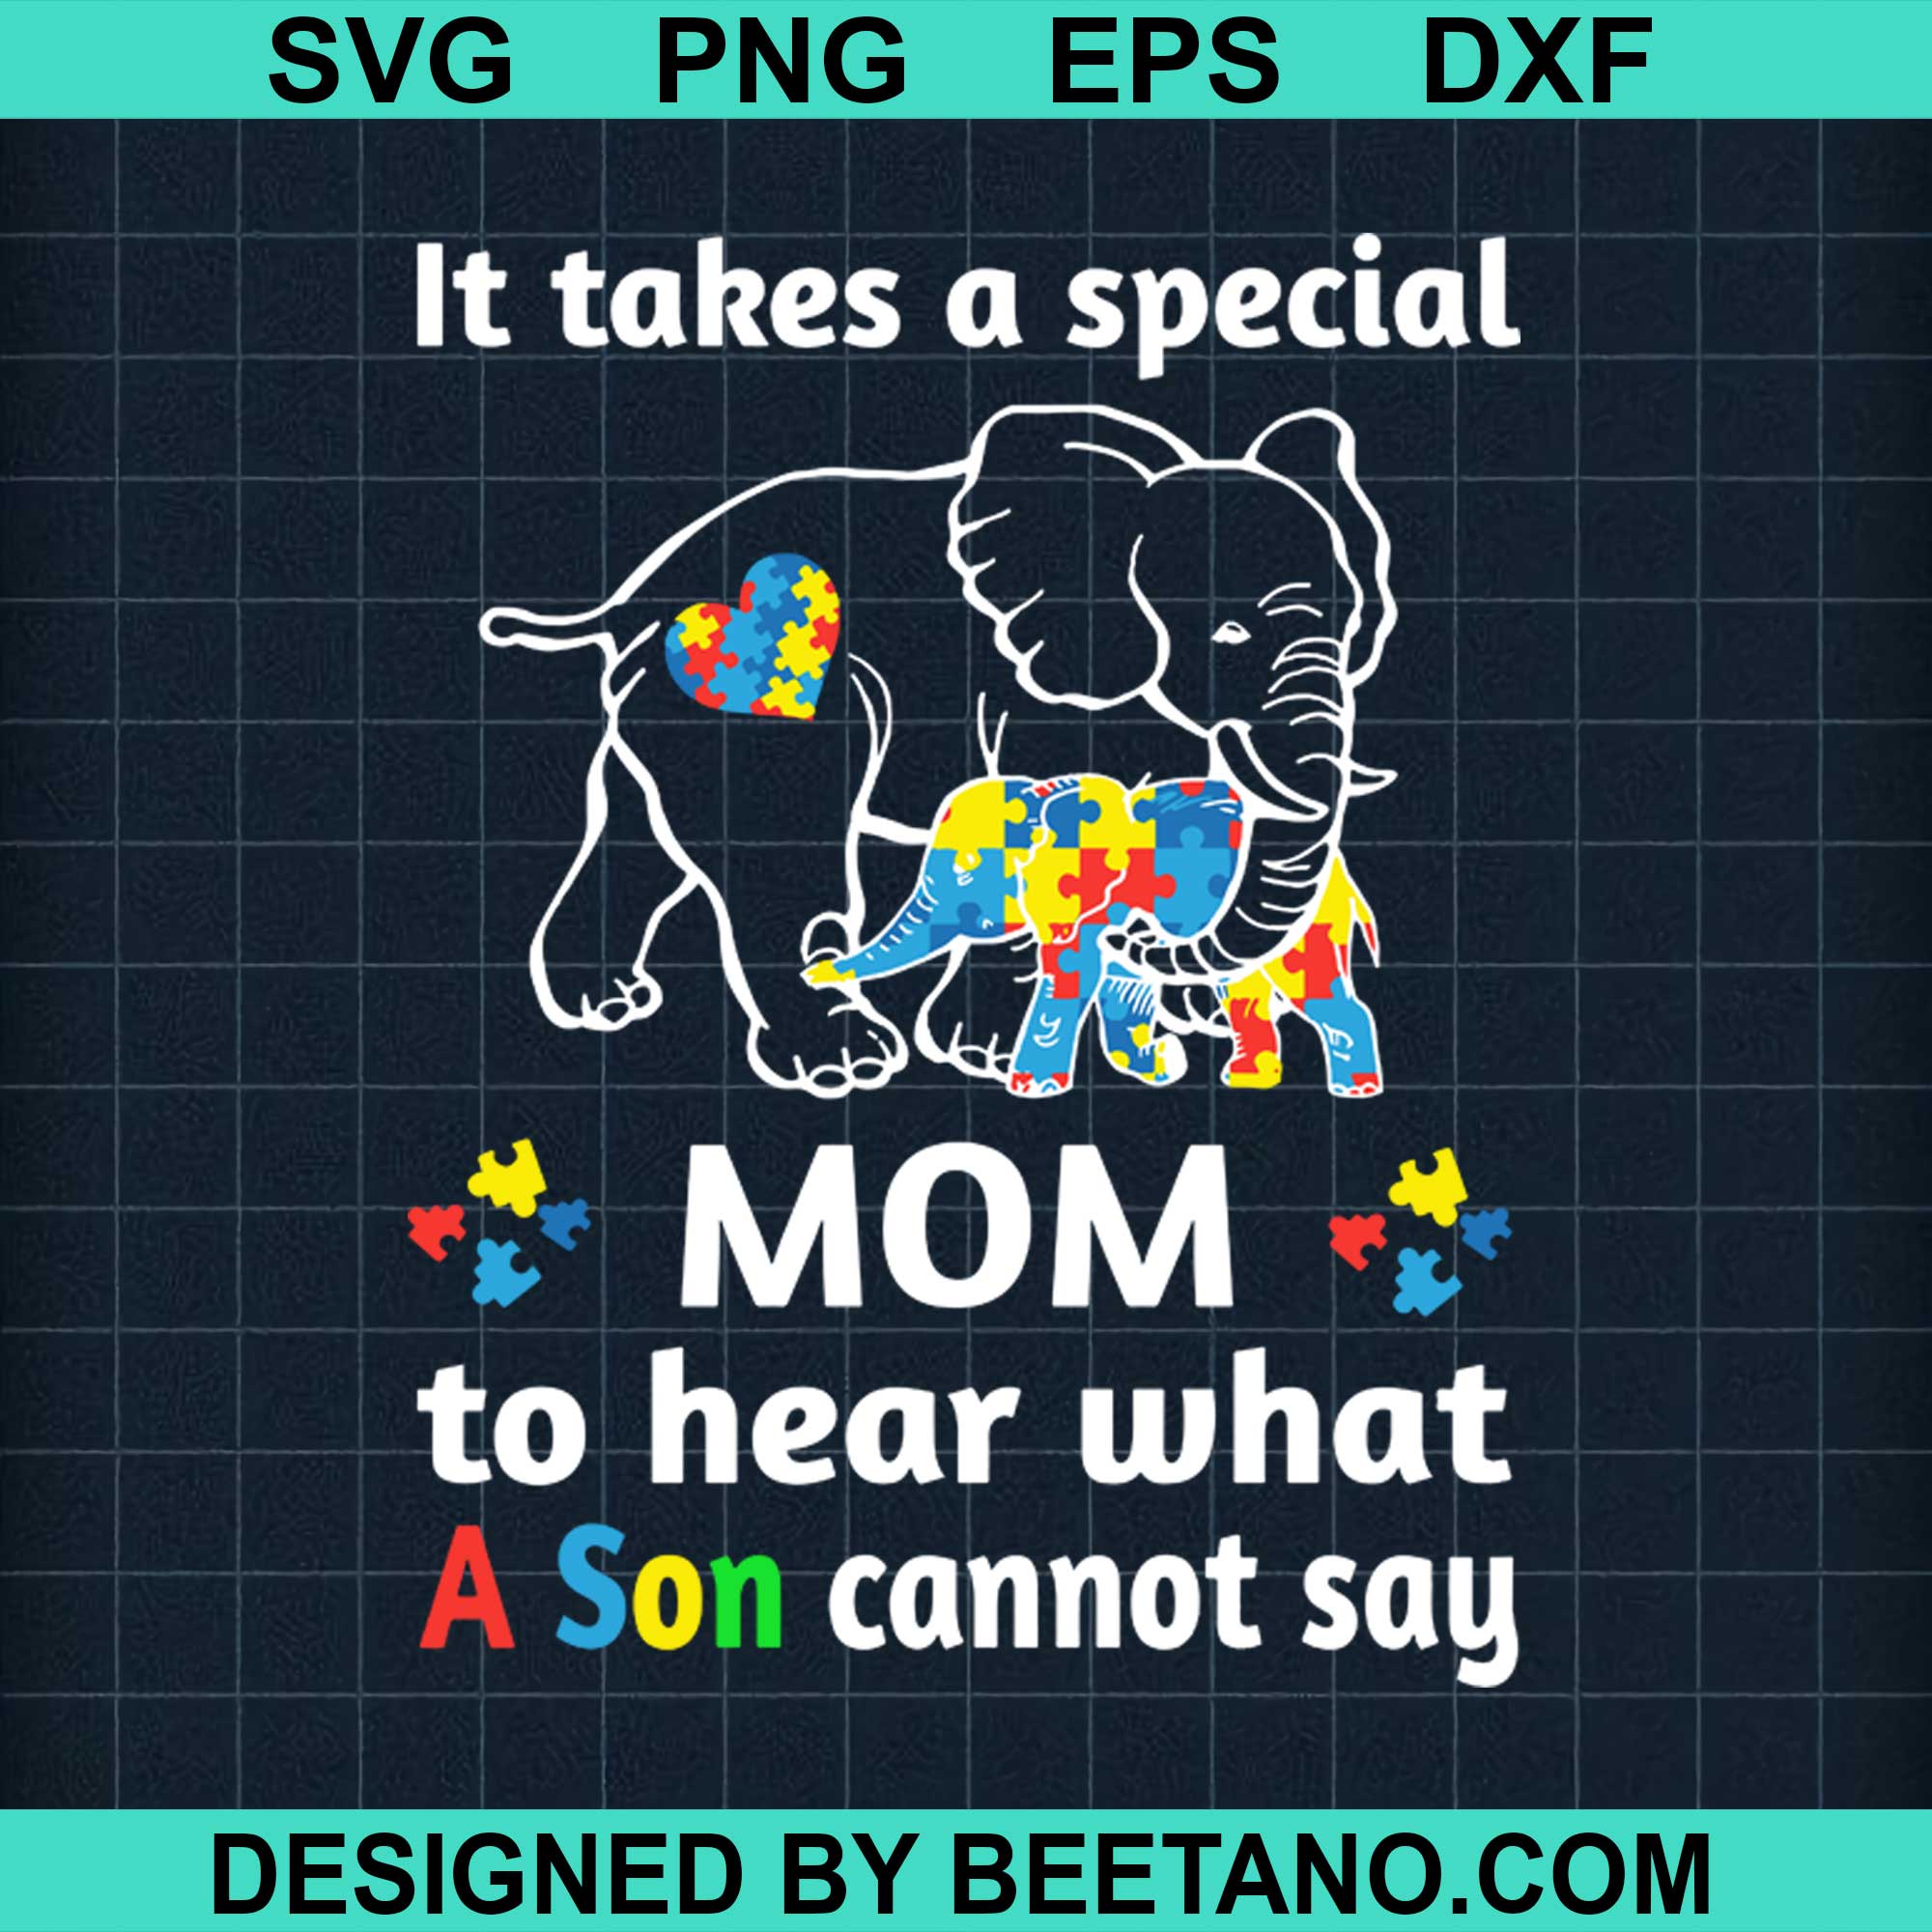 Download Elephant Autism A Special Mom To Hear A Son Cannot Say 2020 Svg Cut Fi